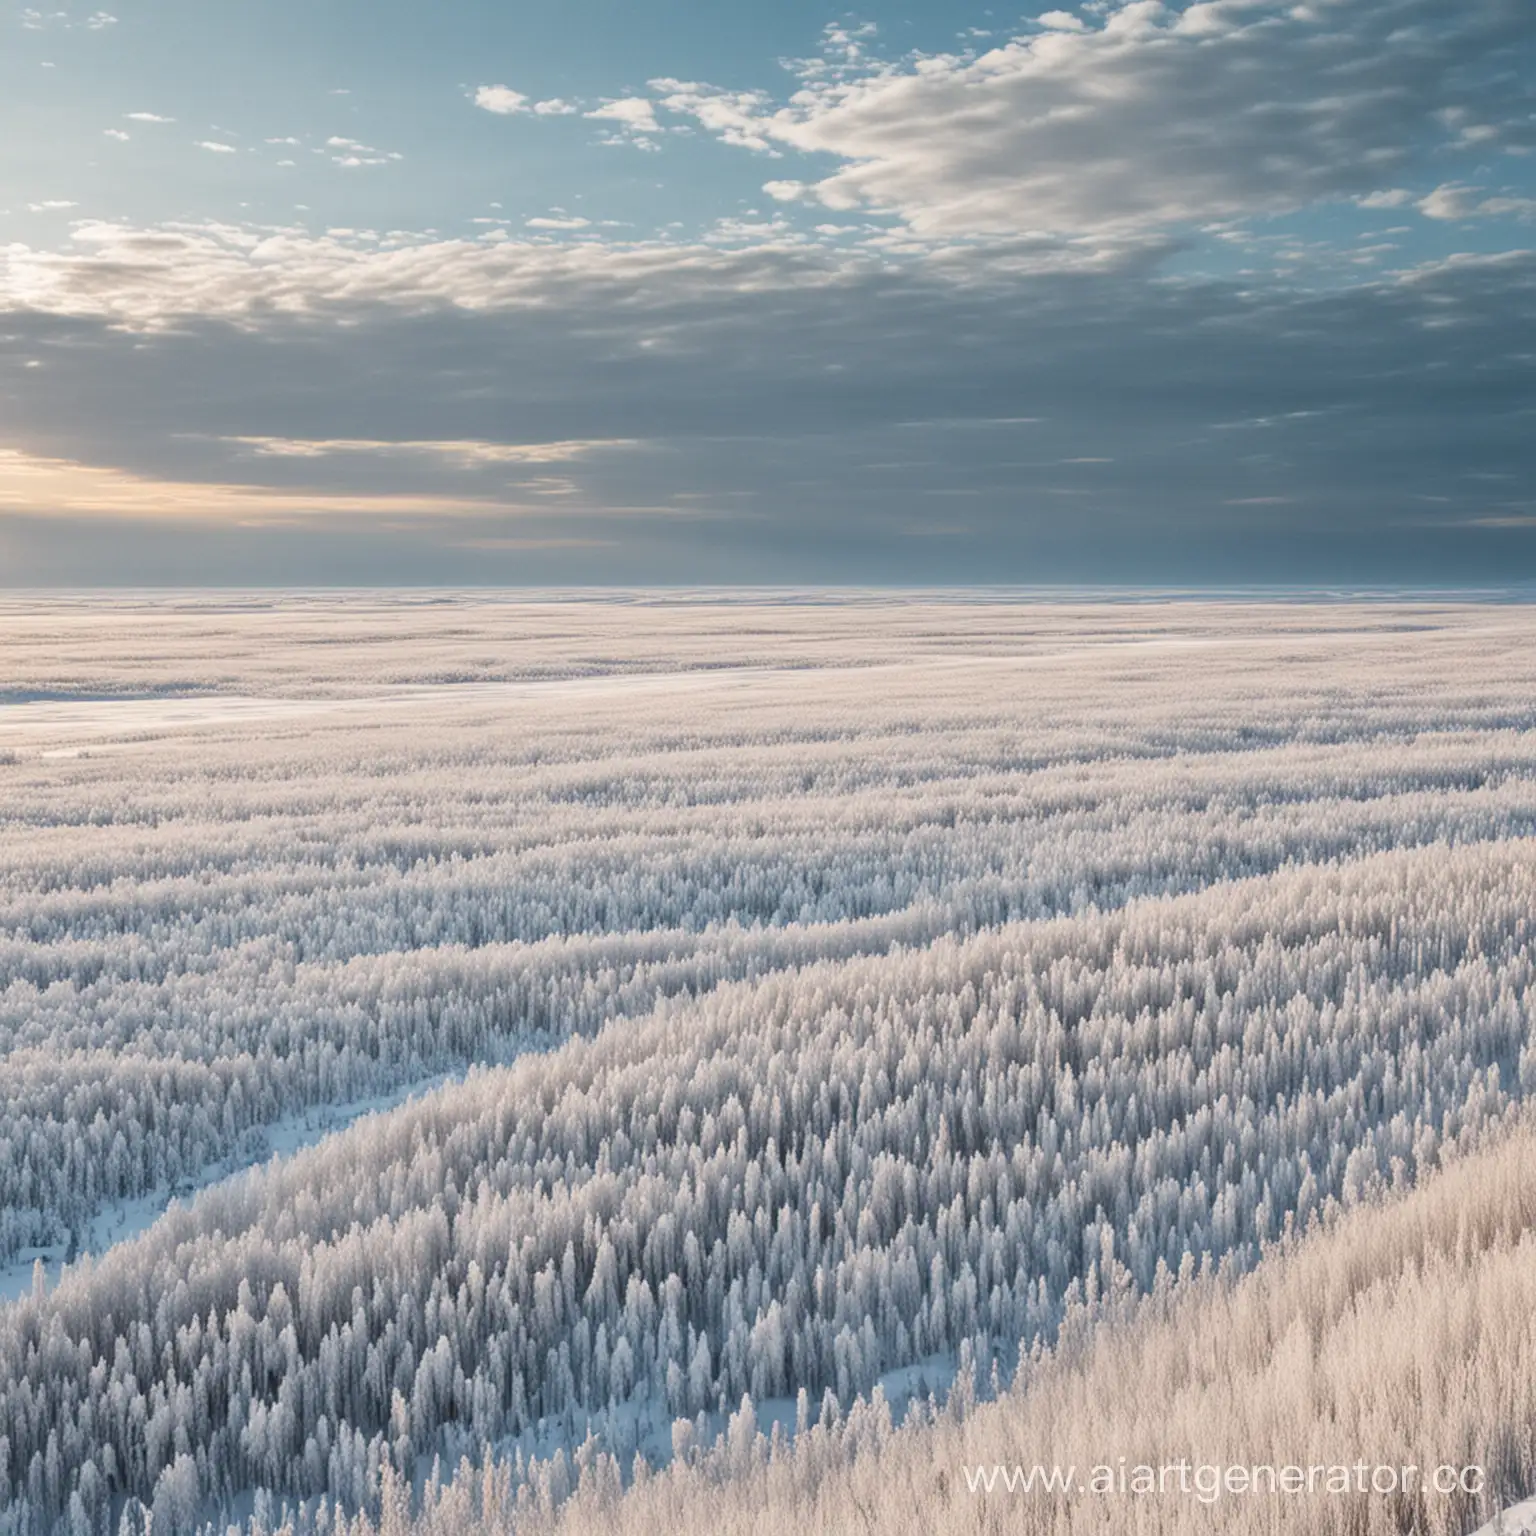 Vast-Siberian-Landscapes-Majestic-Wilderness-and-Endless-Horizons